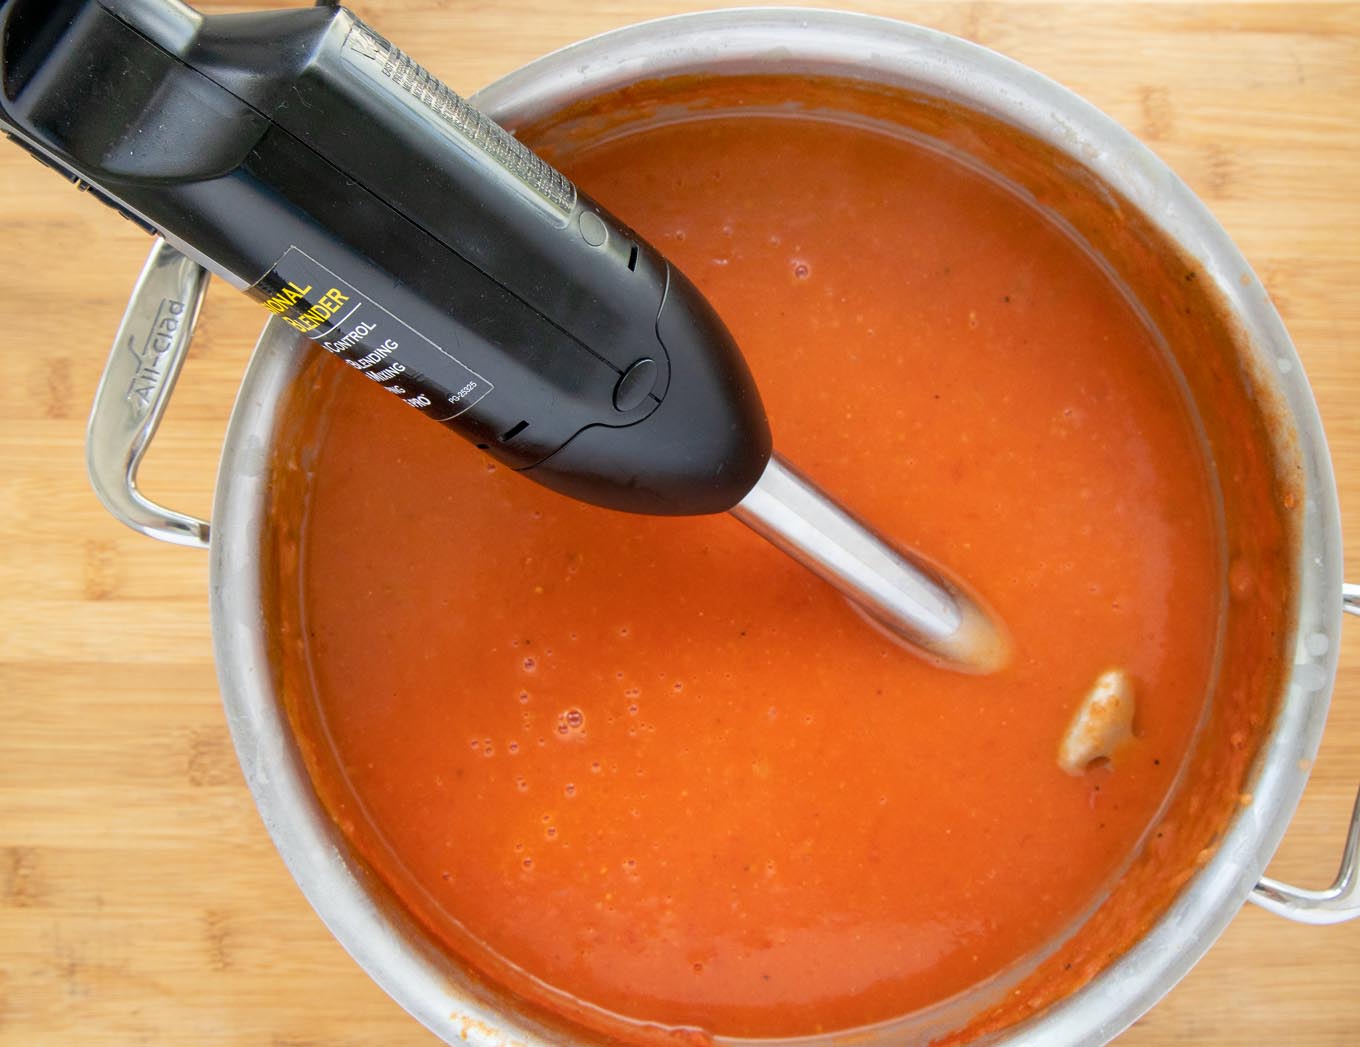 Tomato soup with immersion blender sticking out of the pot